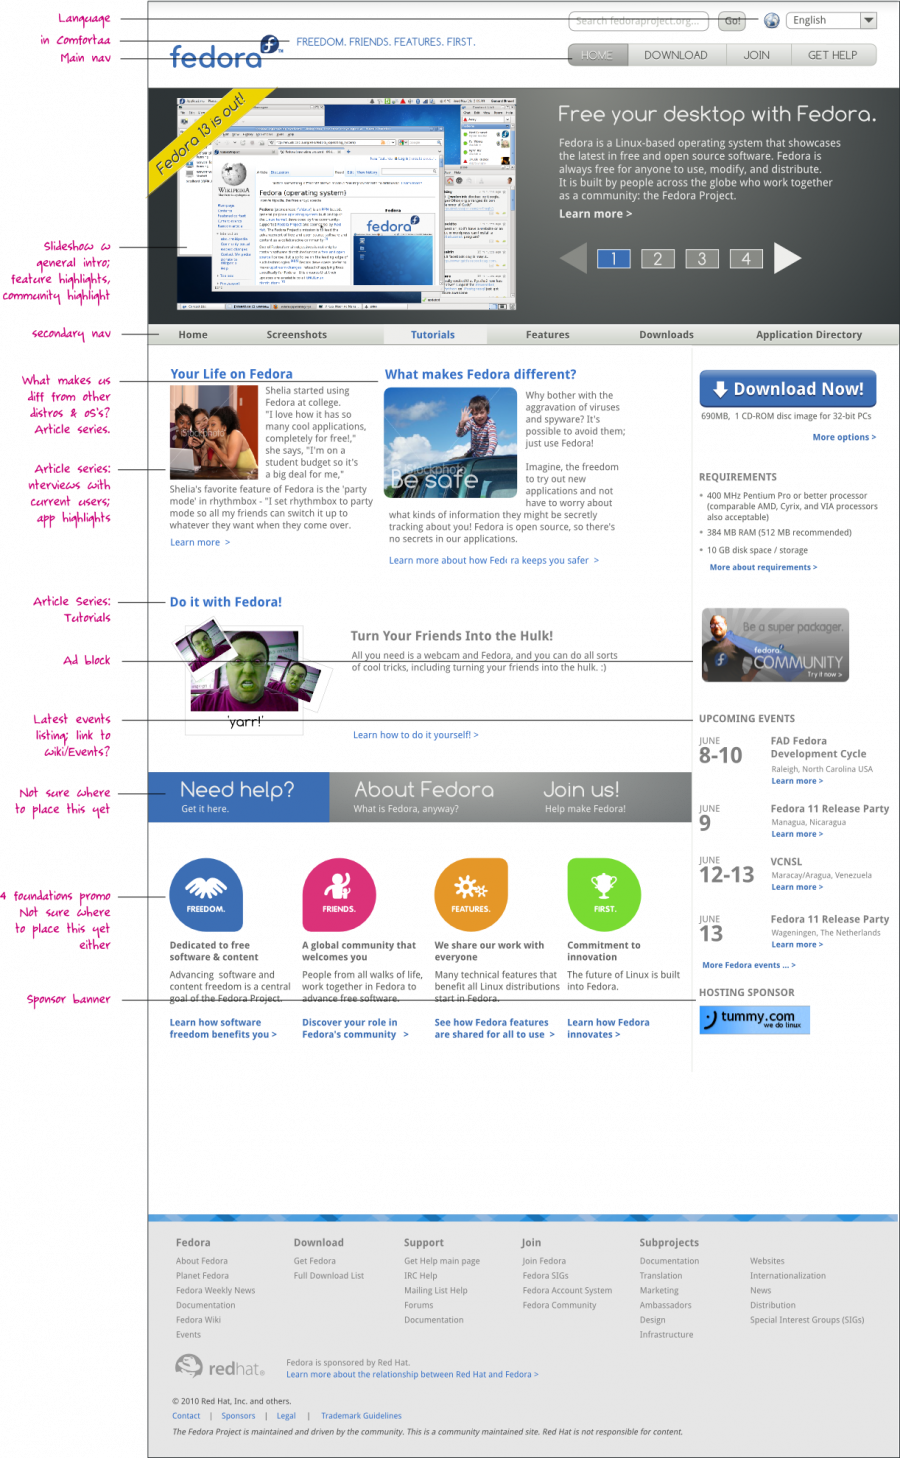 Wwwfpo-redesign-2010 1-frontpage.png